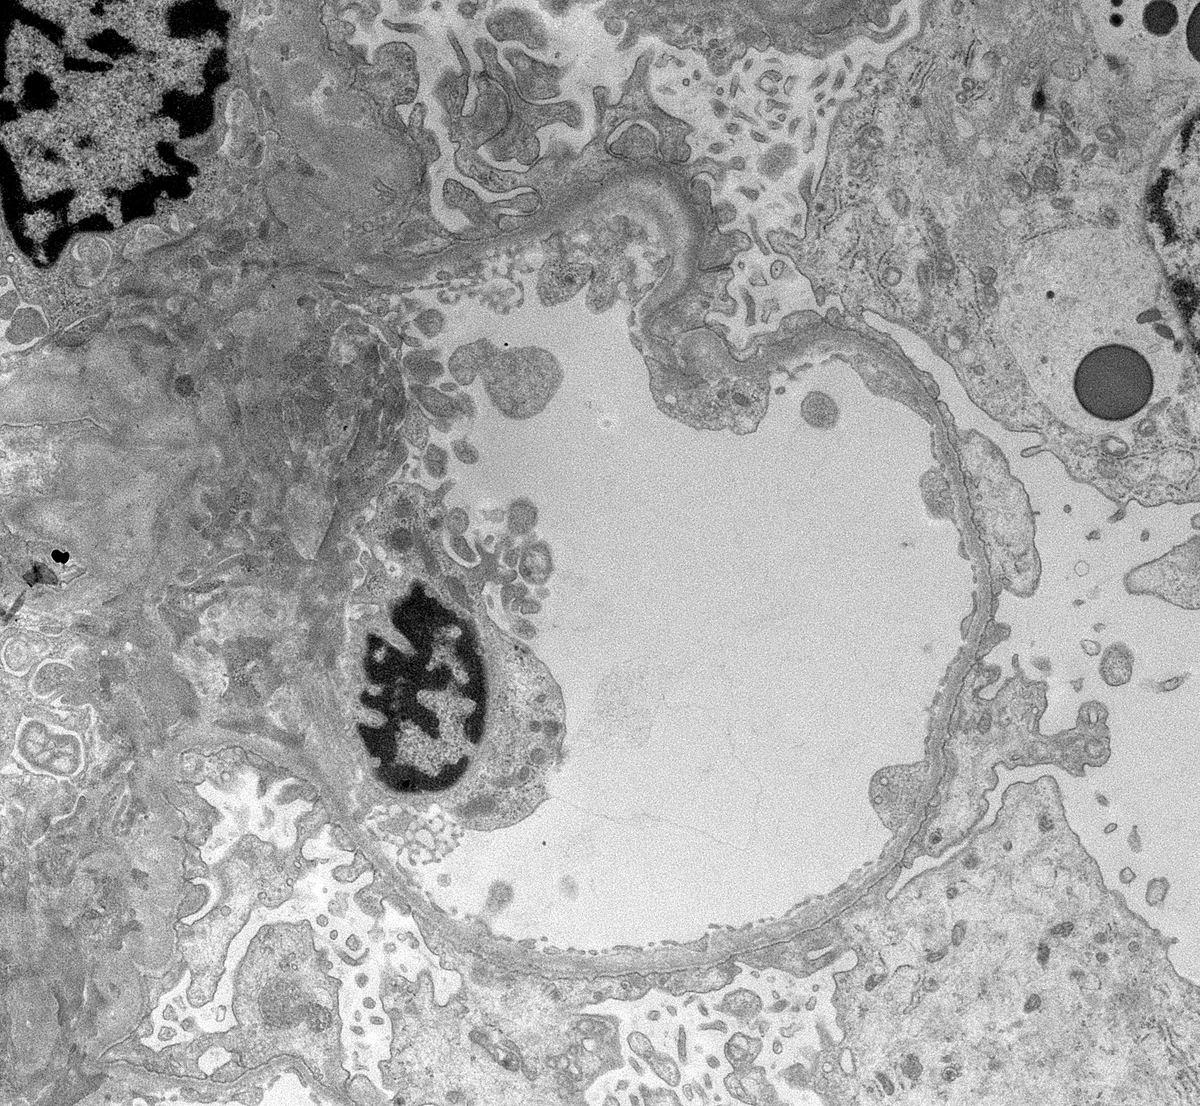 Post-txp recurrence of a primary 'FSGS'(<1 wk). Normal glomeruli with diffuse podocyte foot process effacement. Good illustration that all diffuse podocytopathies likely start off looking like 'minimal change' early on. Better terminology is needed #renalpath #PathTwitter